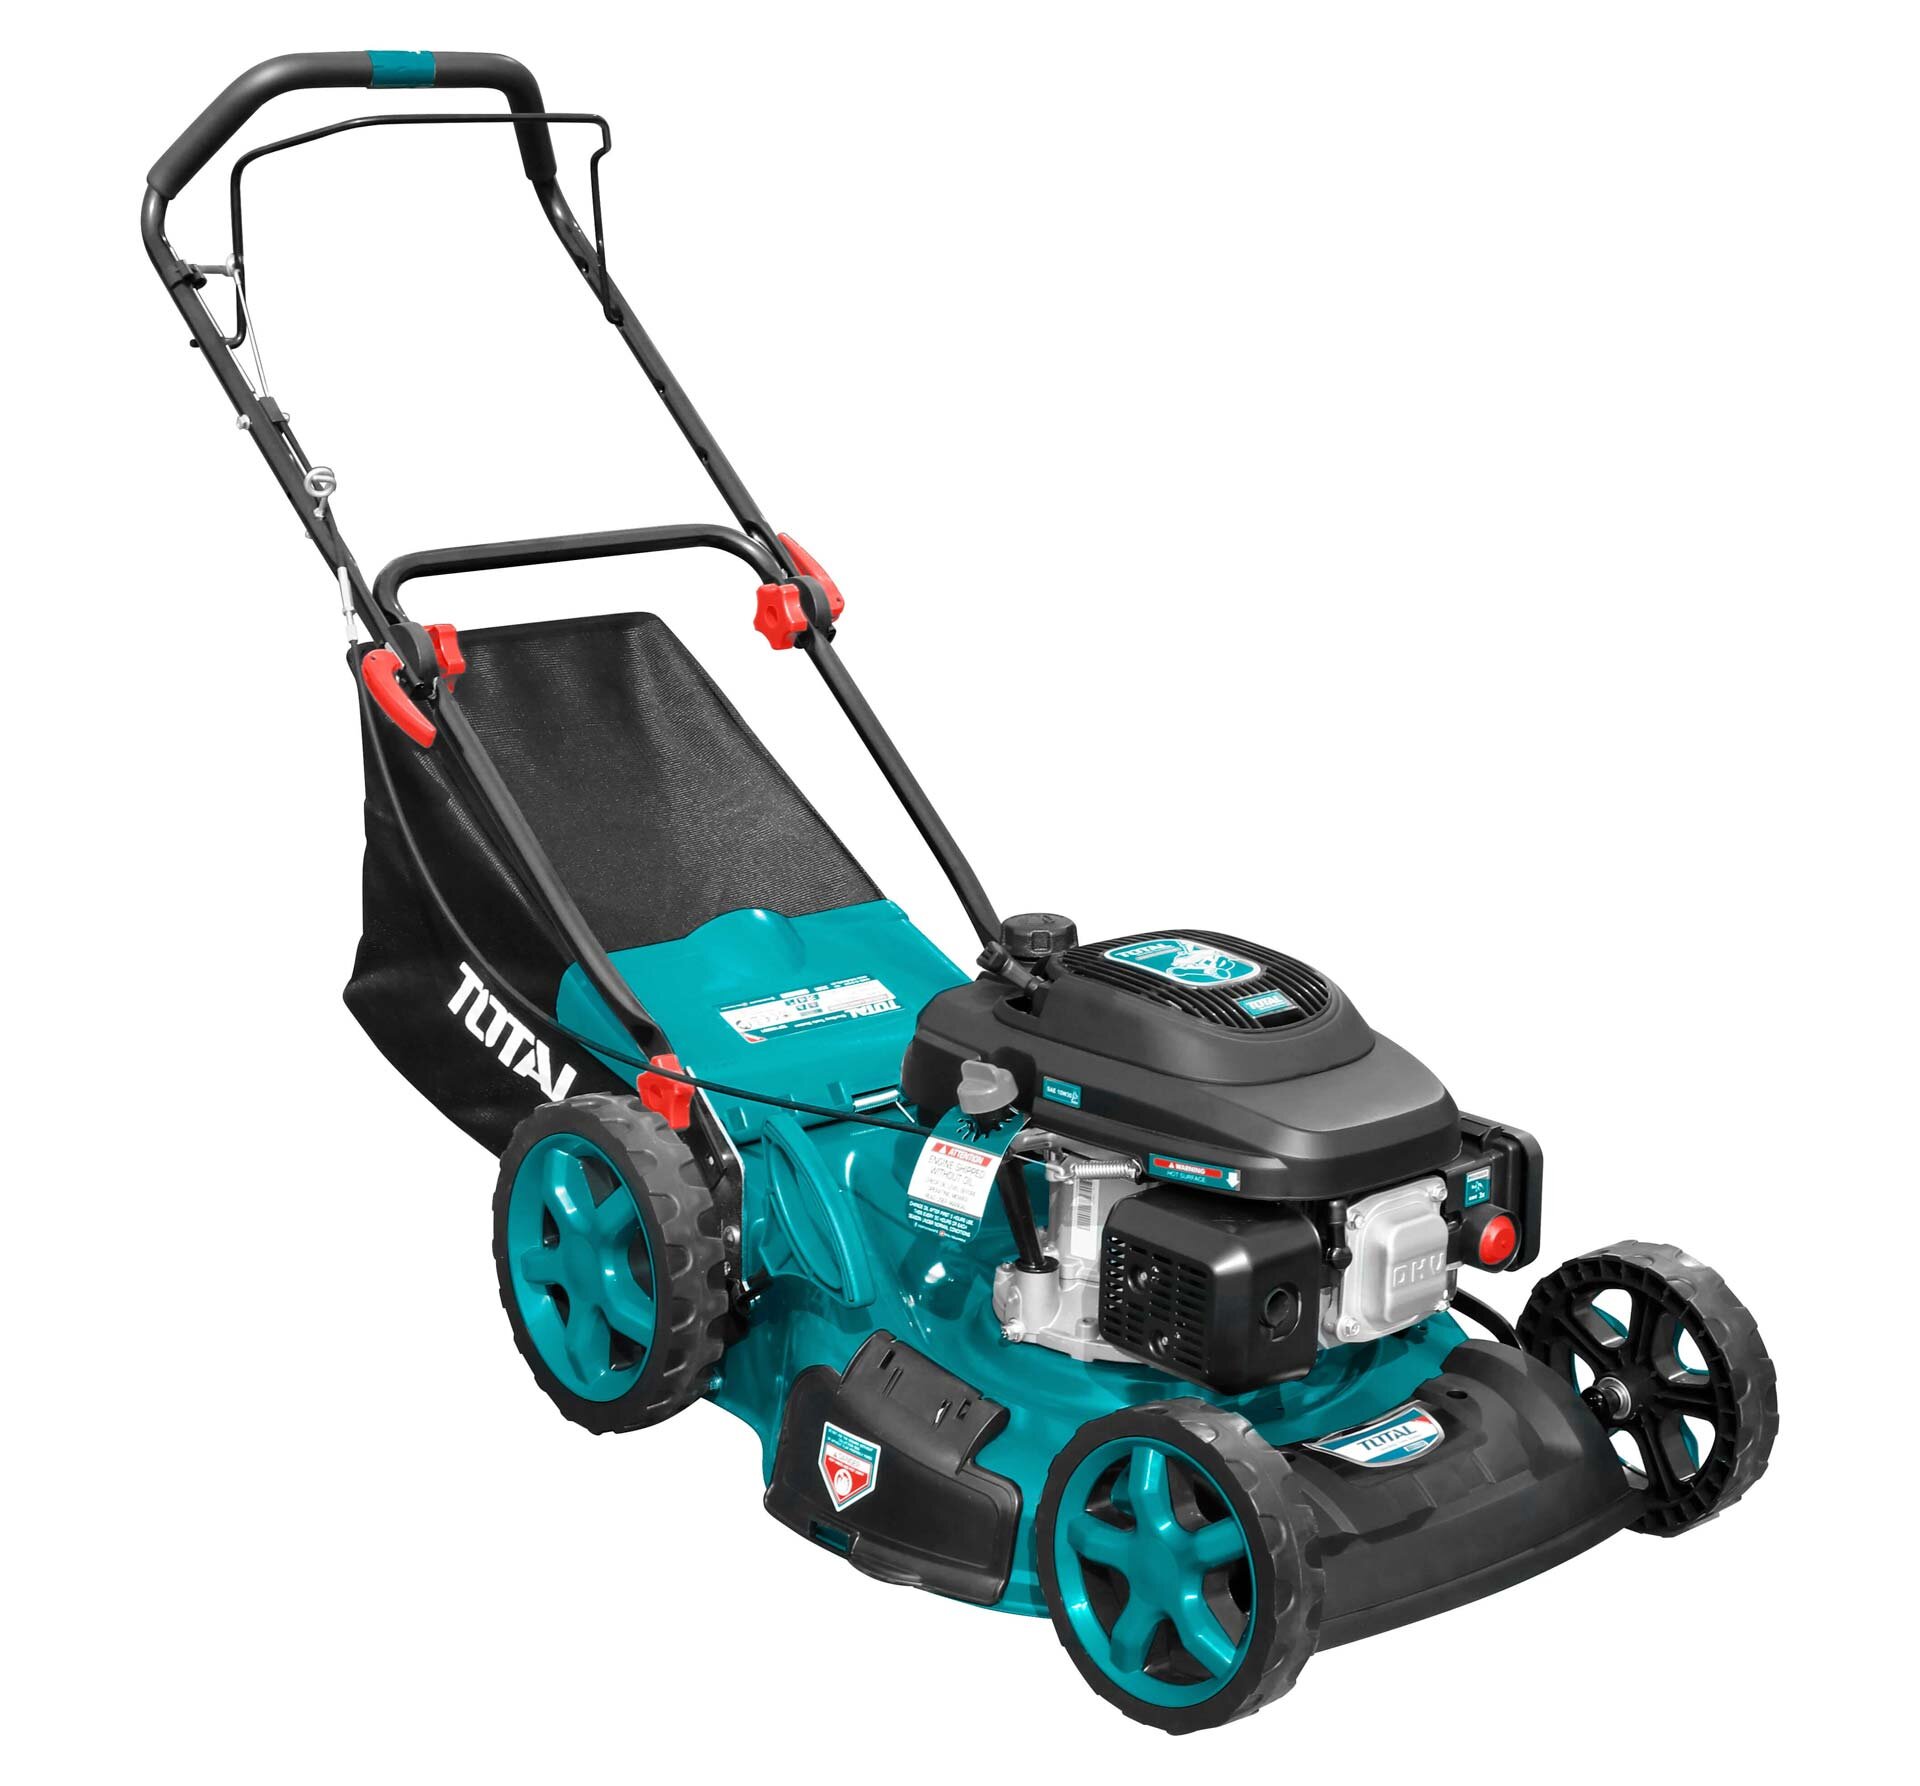 TOTAL Gasoline Lawn Mower 4.8HP - TGT196201